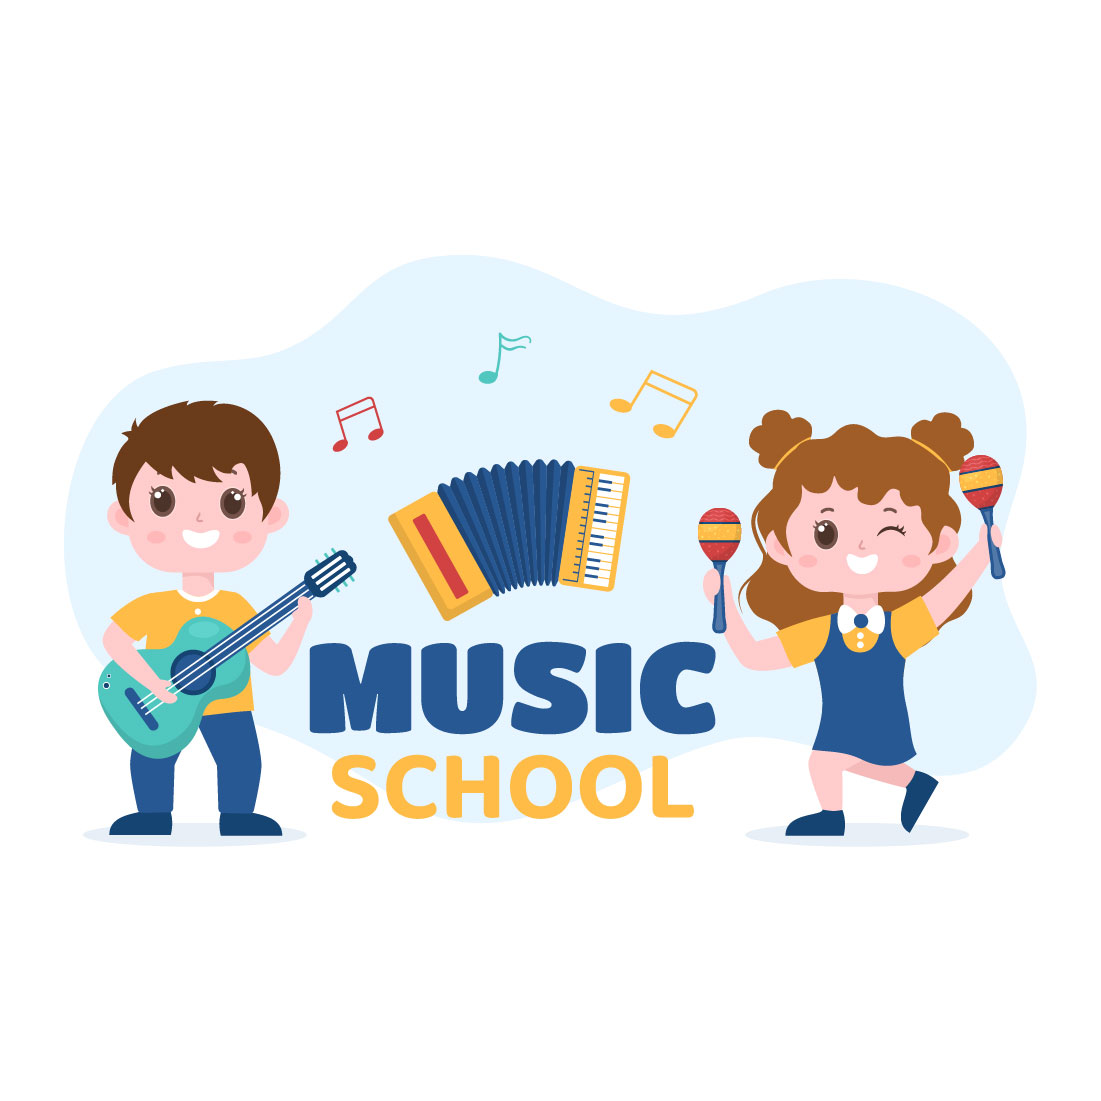 9 Music School Illustration preview image.